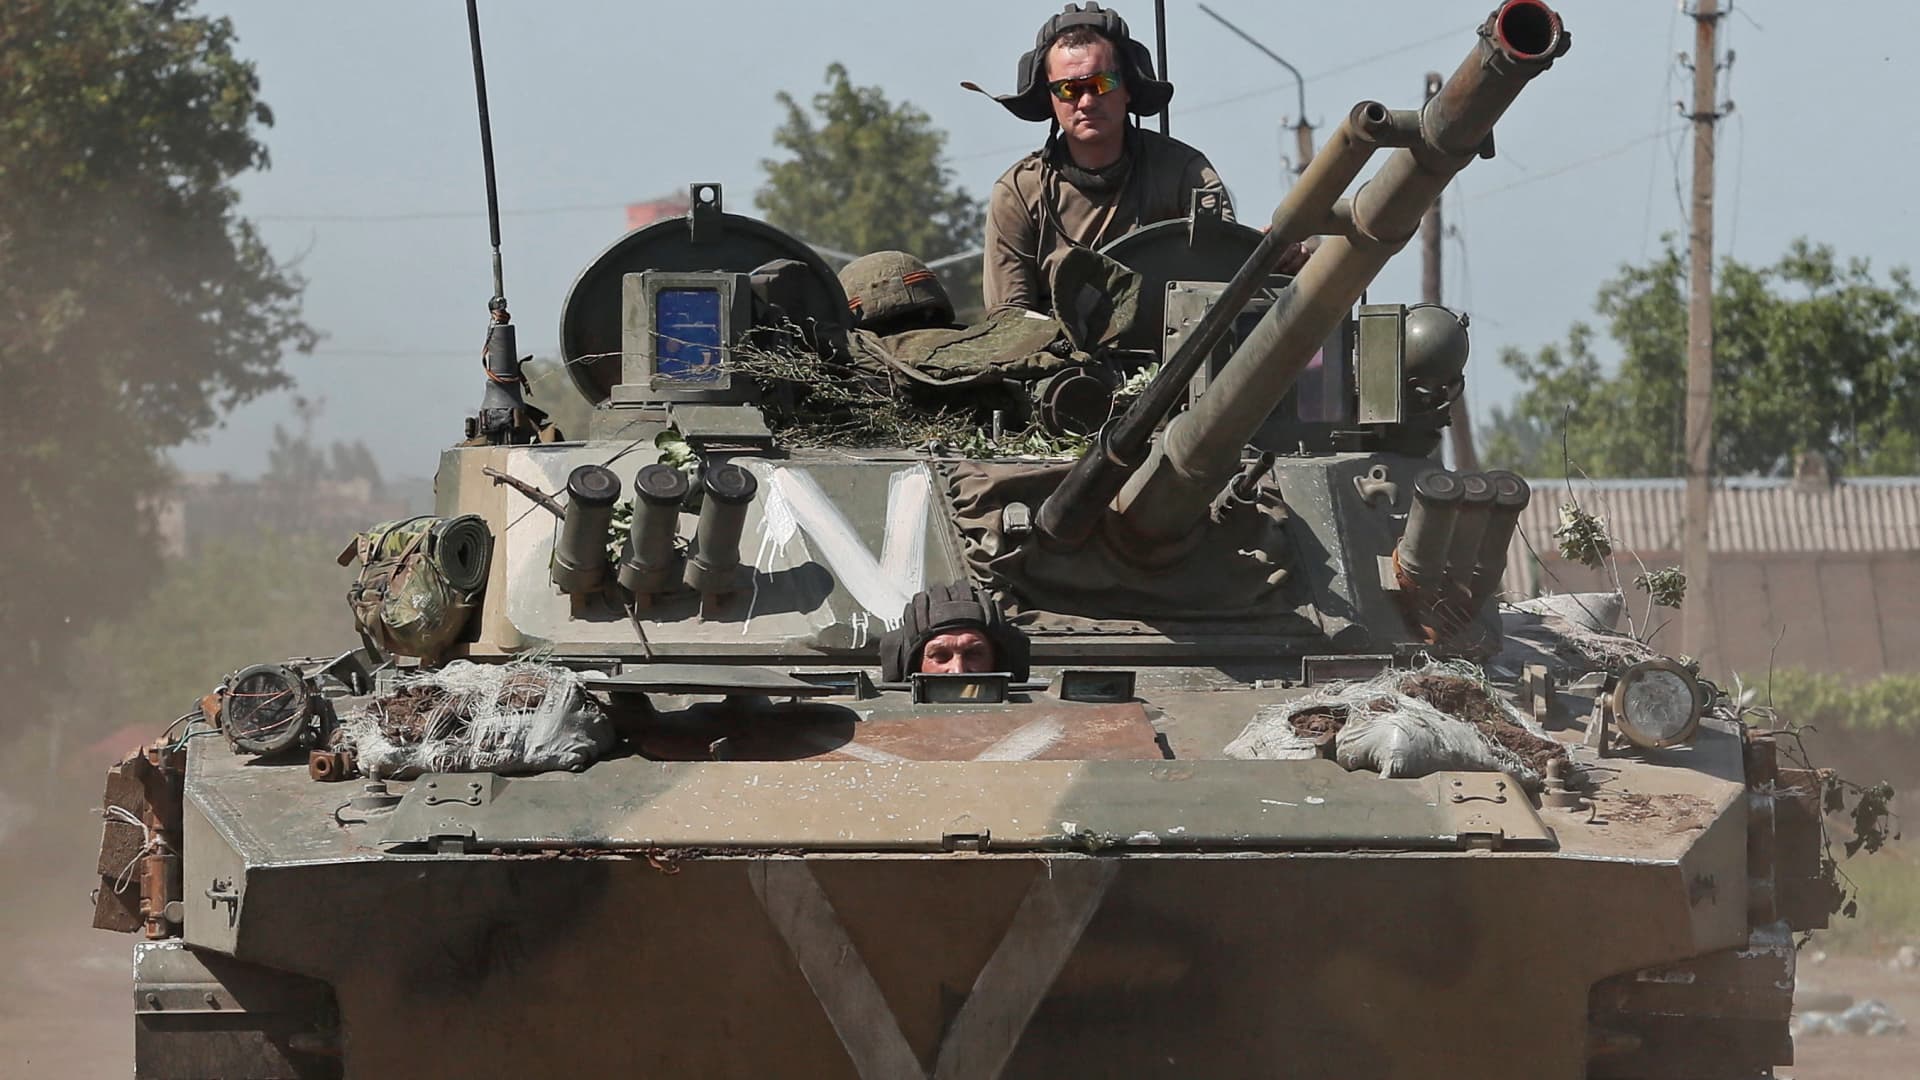 Service members of pro-Russian troops ride an infantry fighting vehicle during Ukraine-Russia conflict in the town of Popasna in the Luhansk Region, Ukraine June 2, 2022.